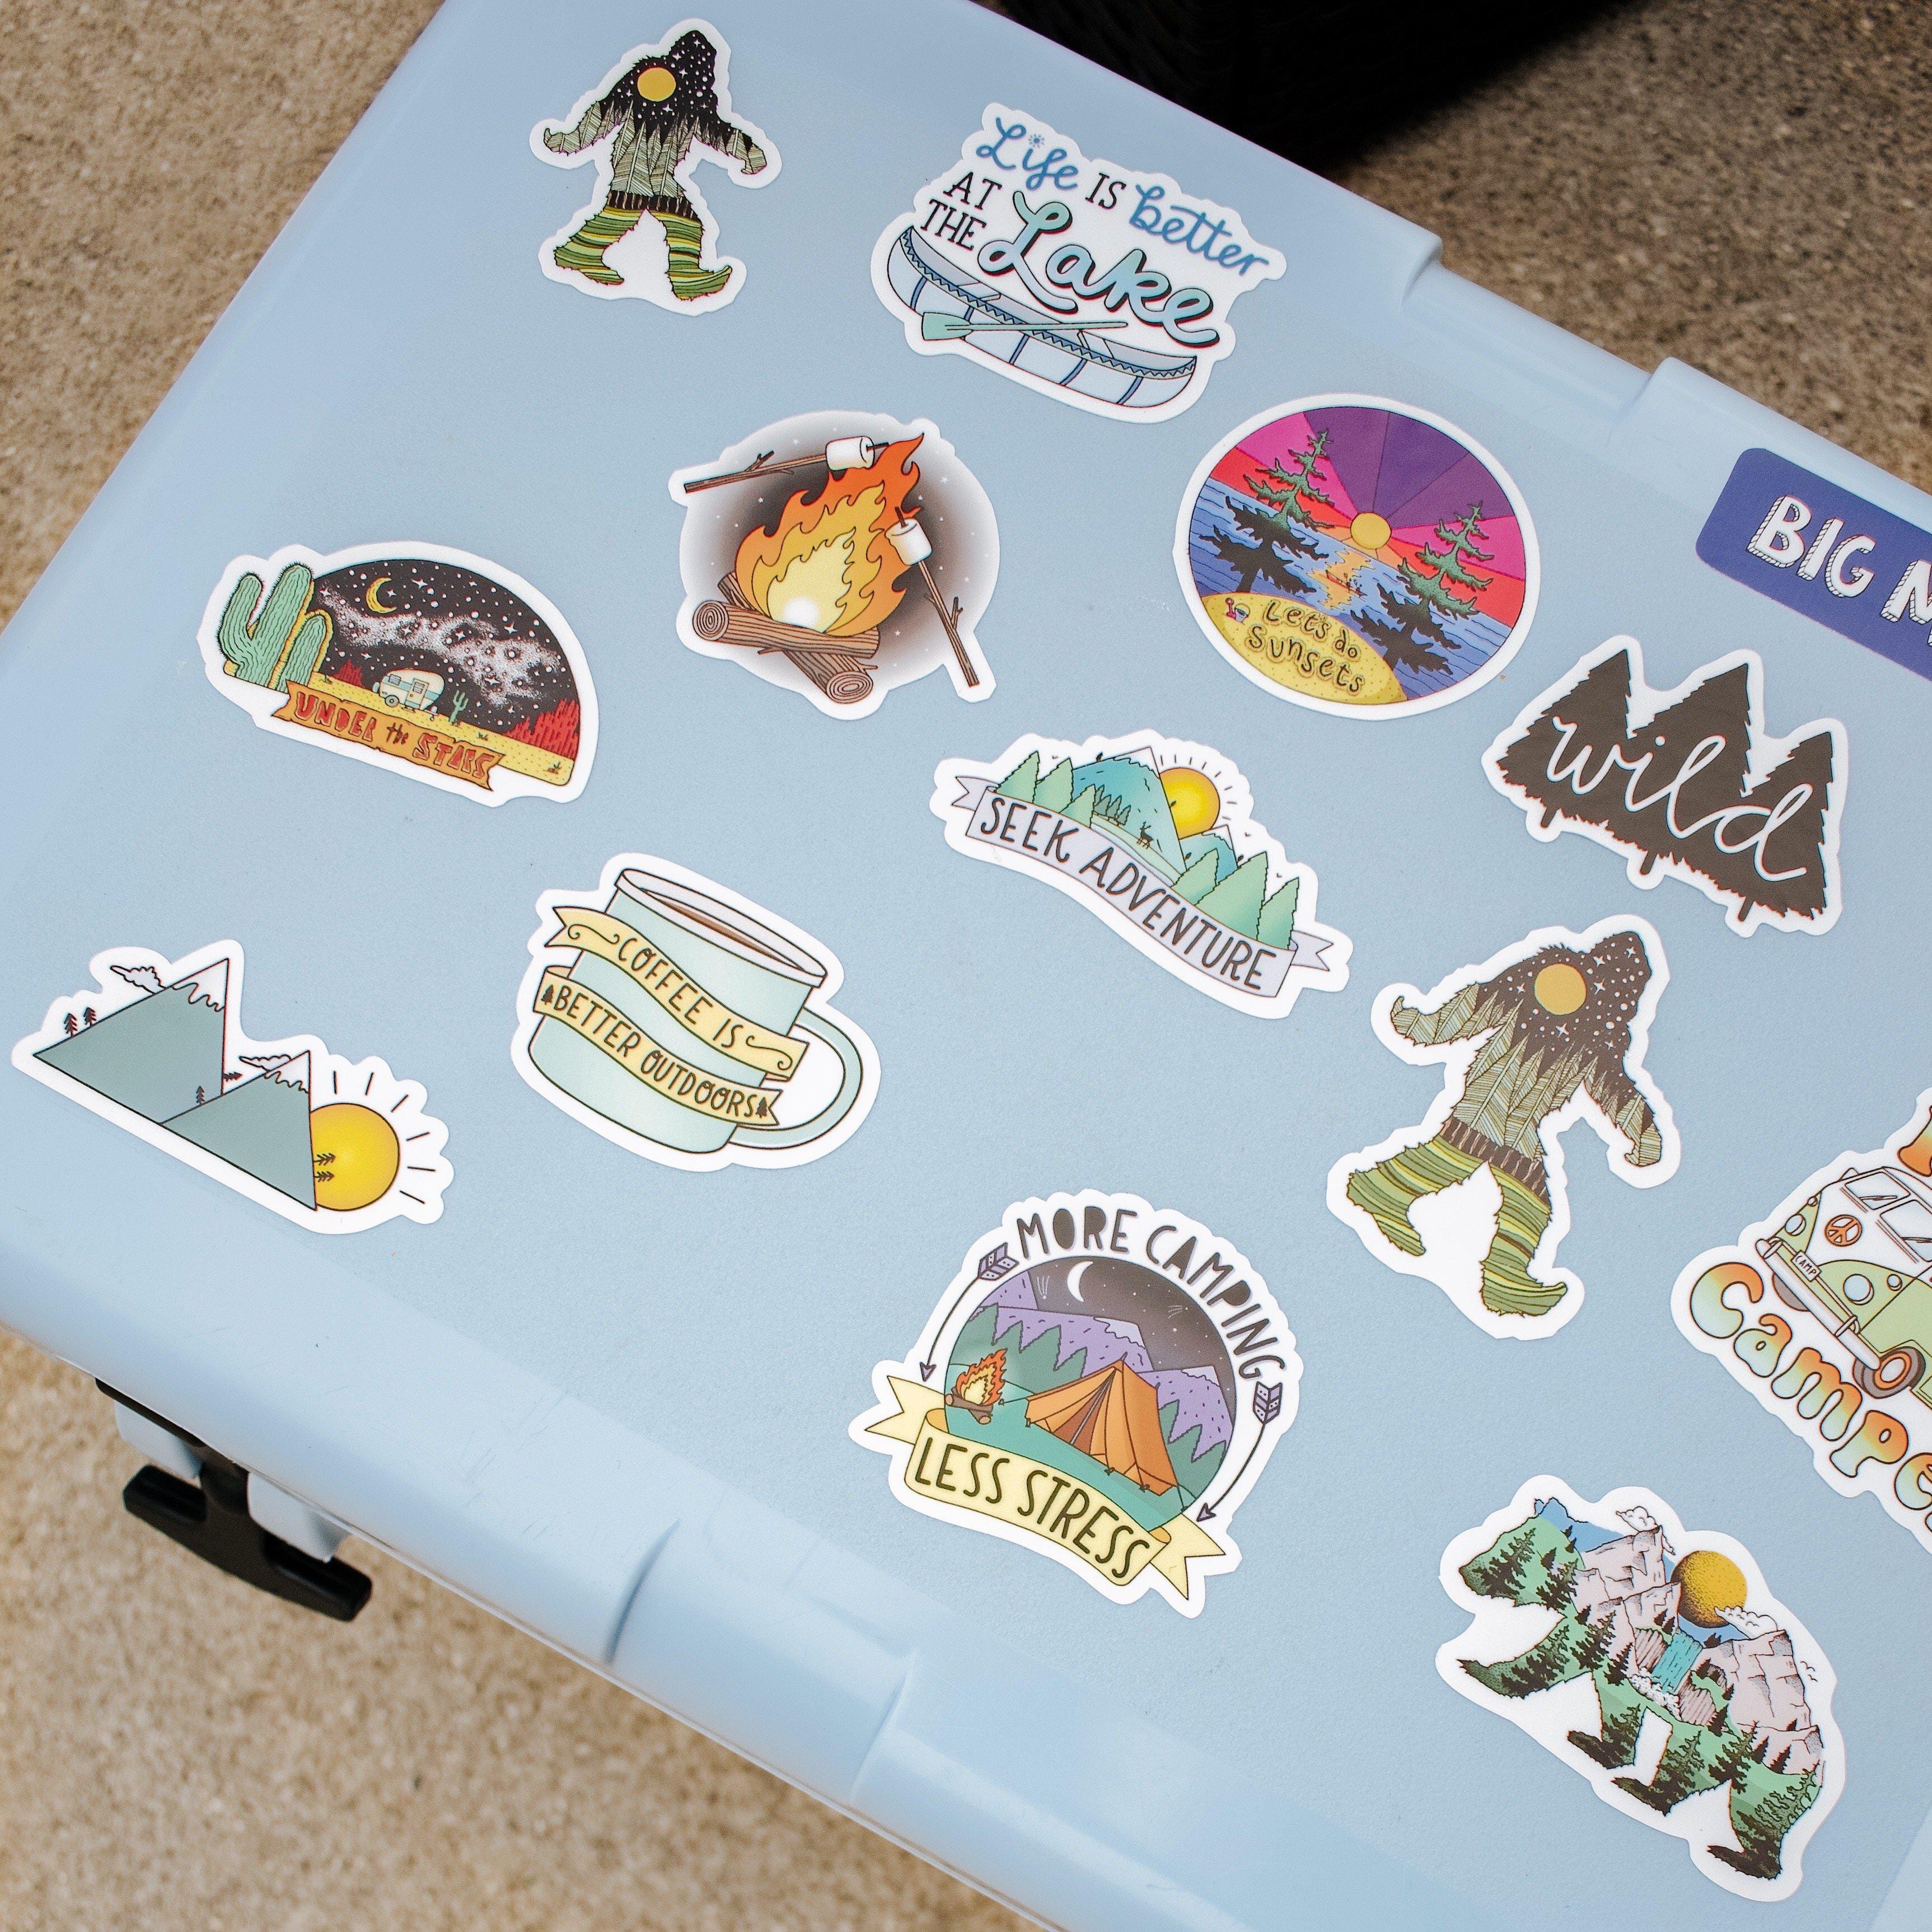 Big Moods Nature and Outdoors Sticker Pack 10pc